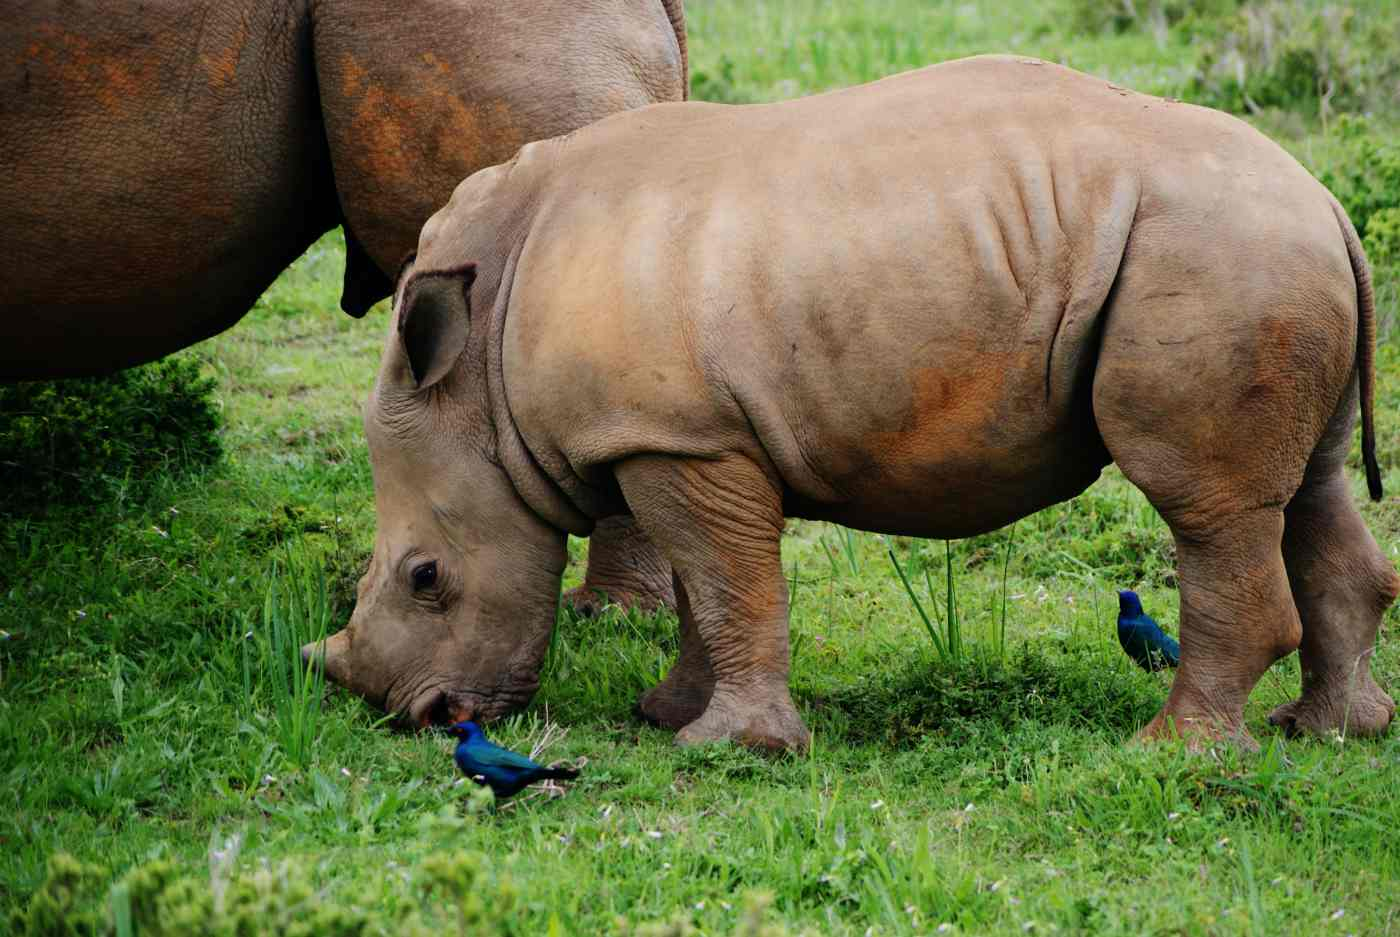 With No Male Northern White Rhinos Left, 10 Viable Eggs Offer Hope For the Species Through Embryo Transfer